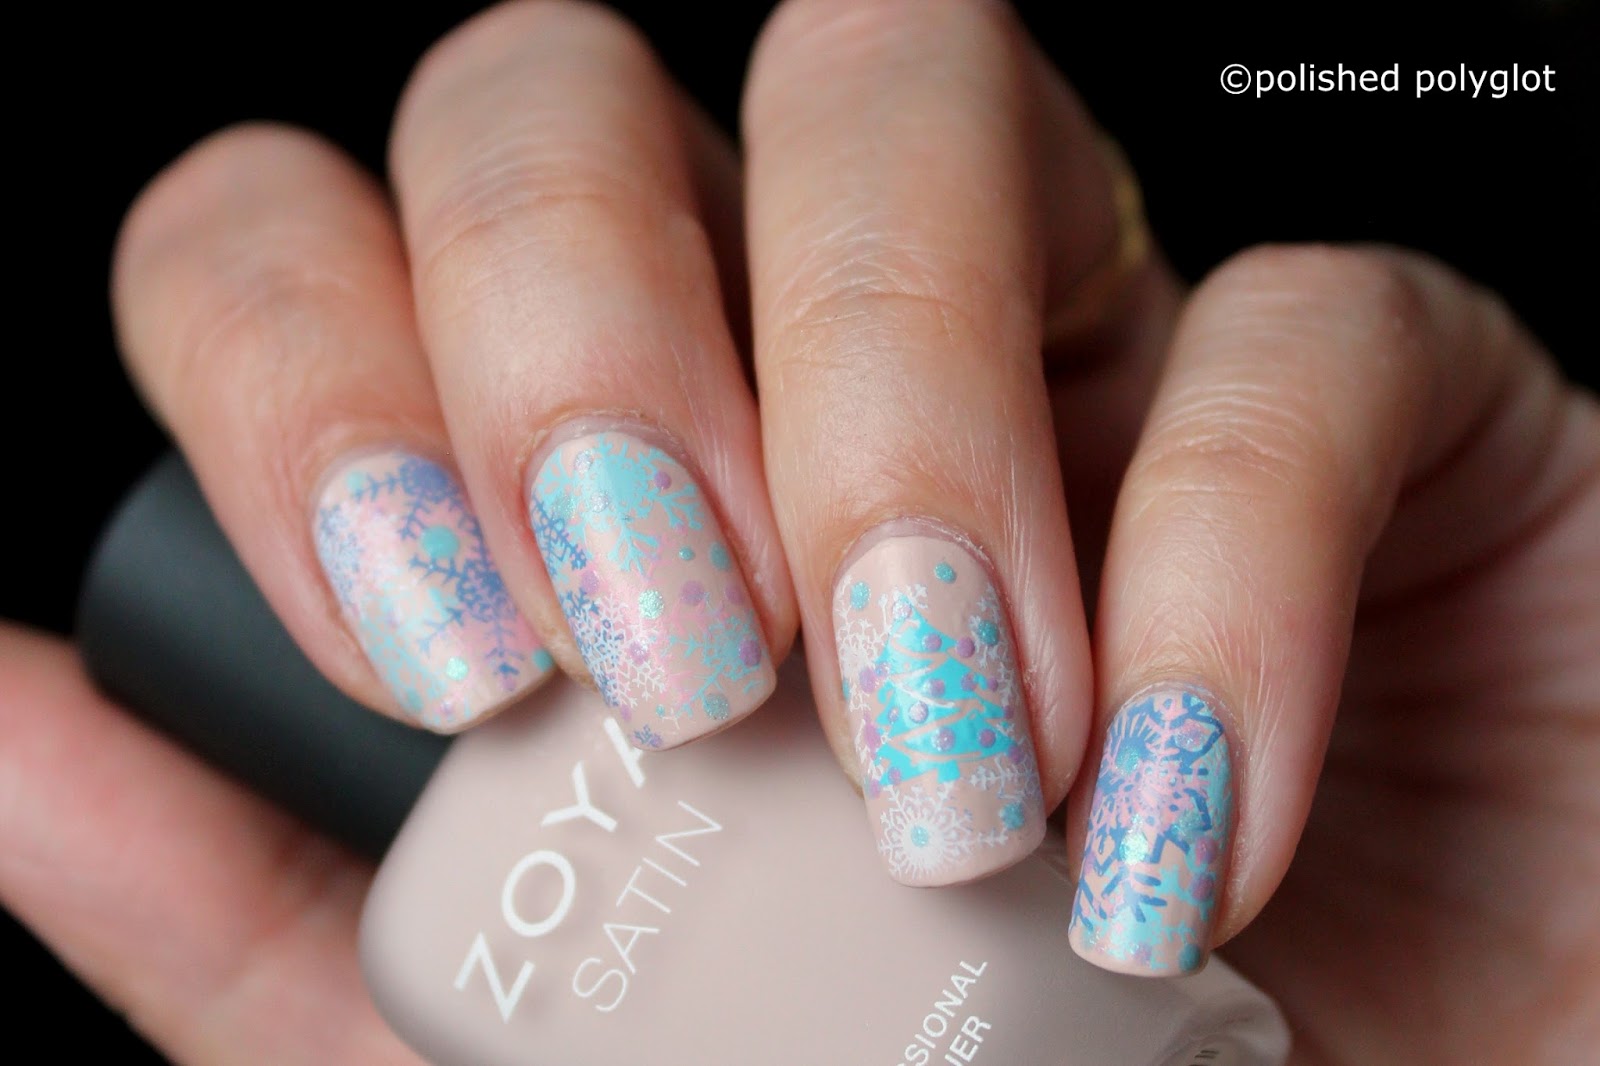 10. White and Pastel Nail Art Ideas - wide 2